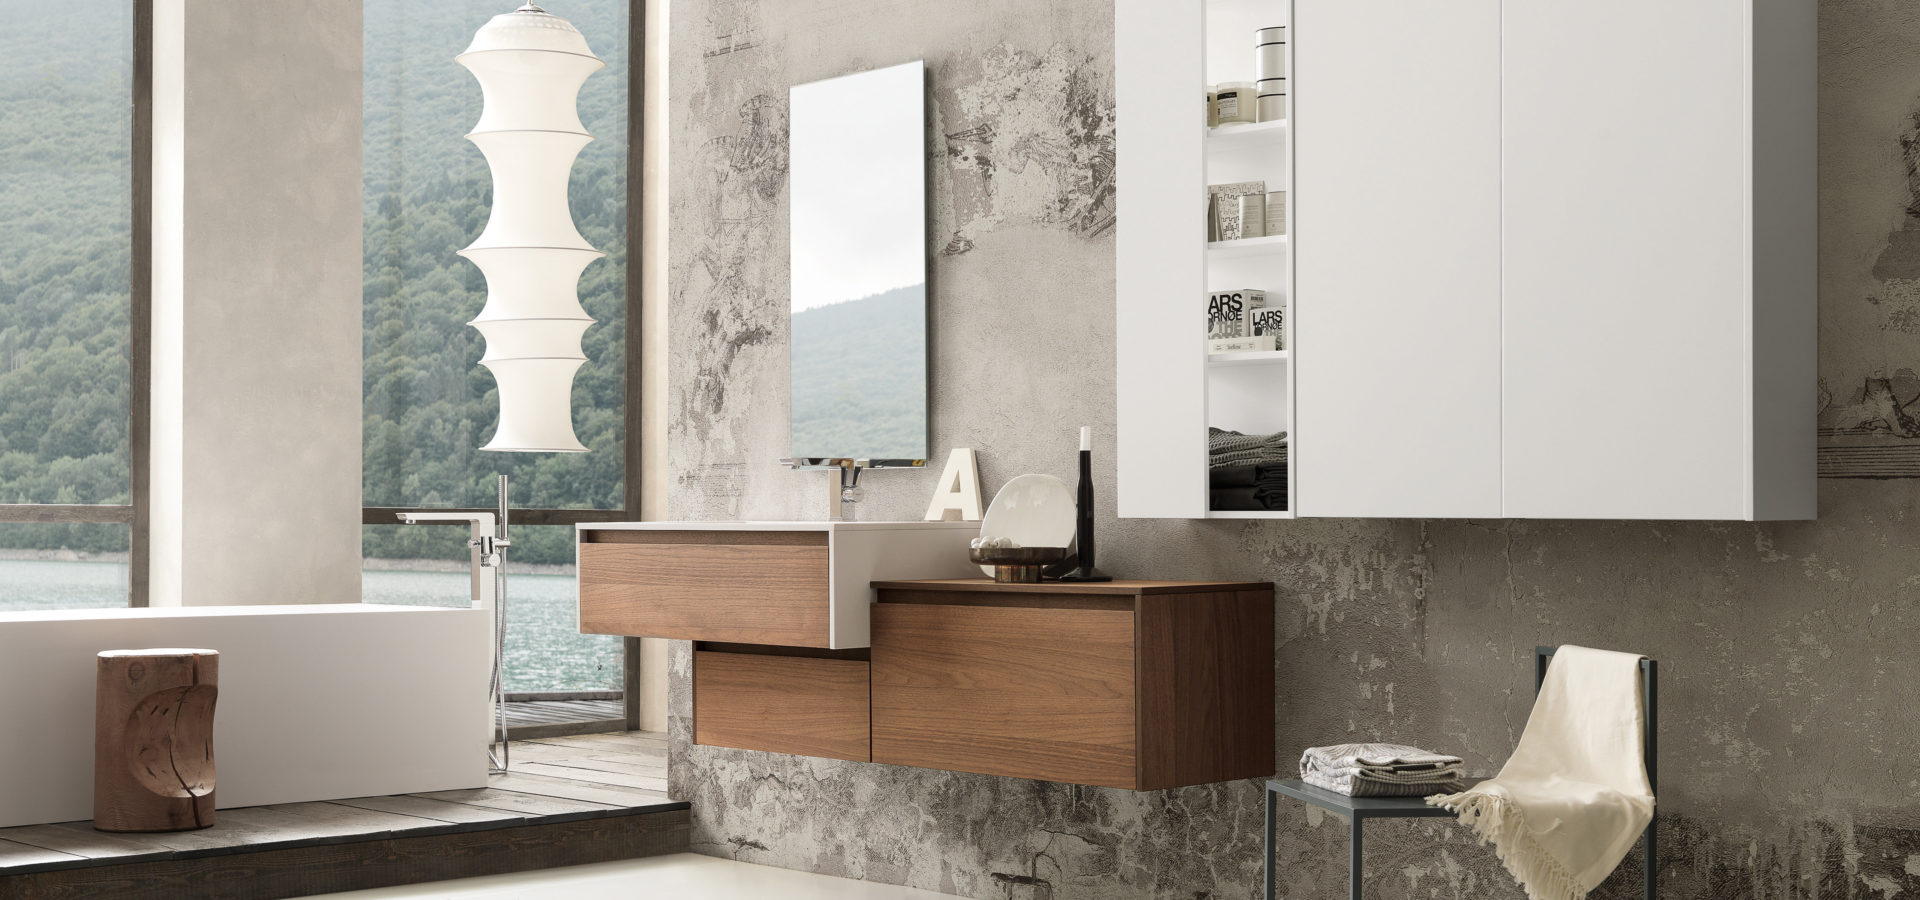 How to Select the Best Bathroom Cabinets for Your Home